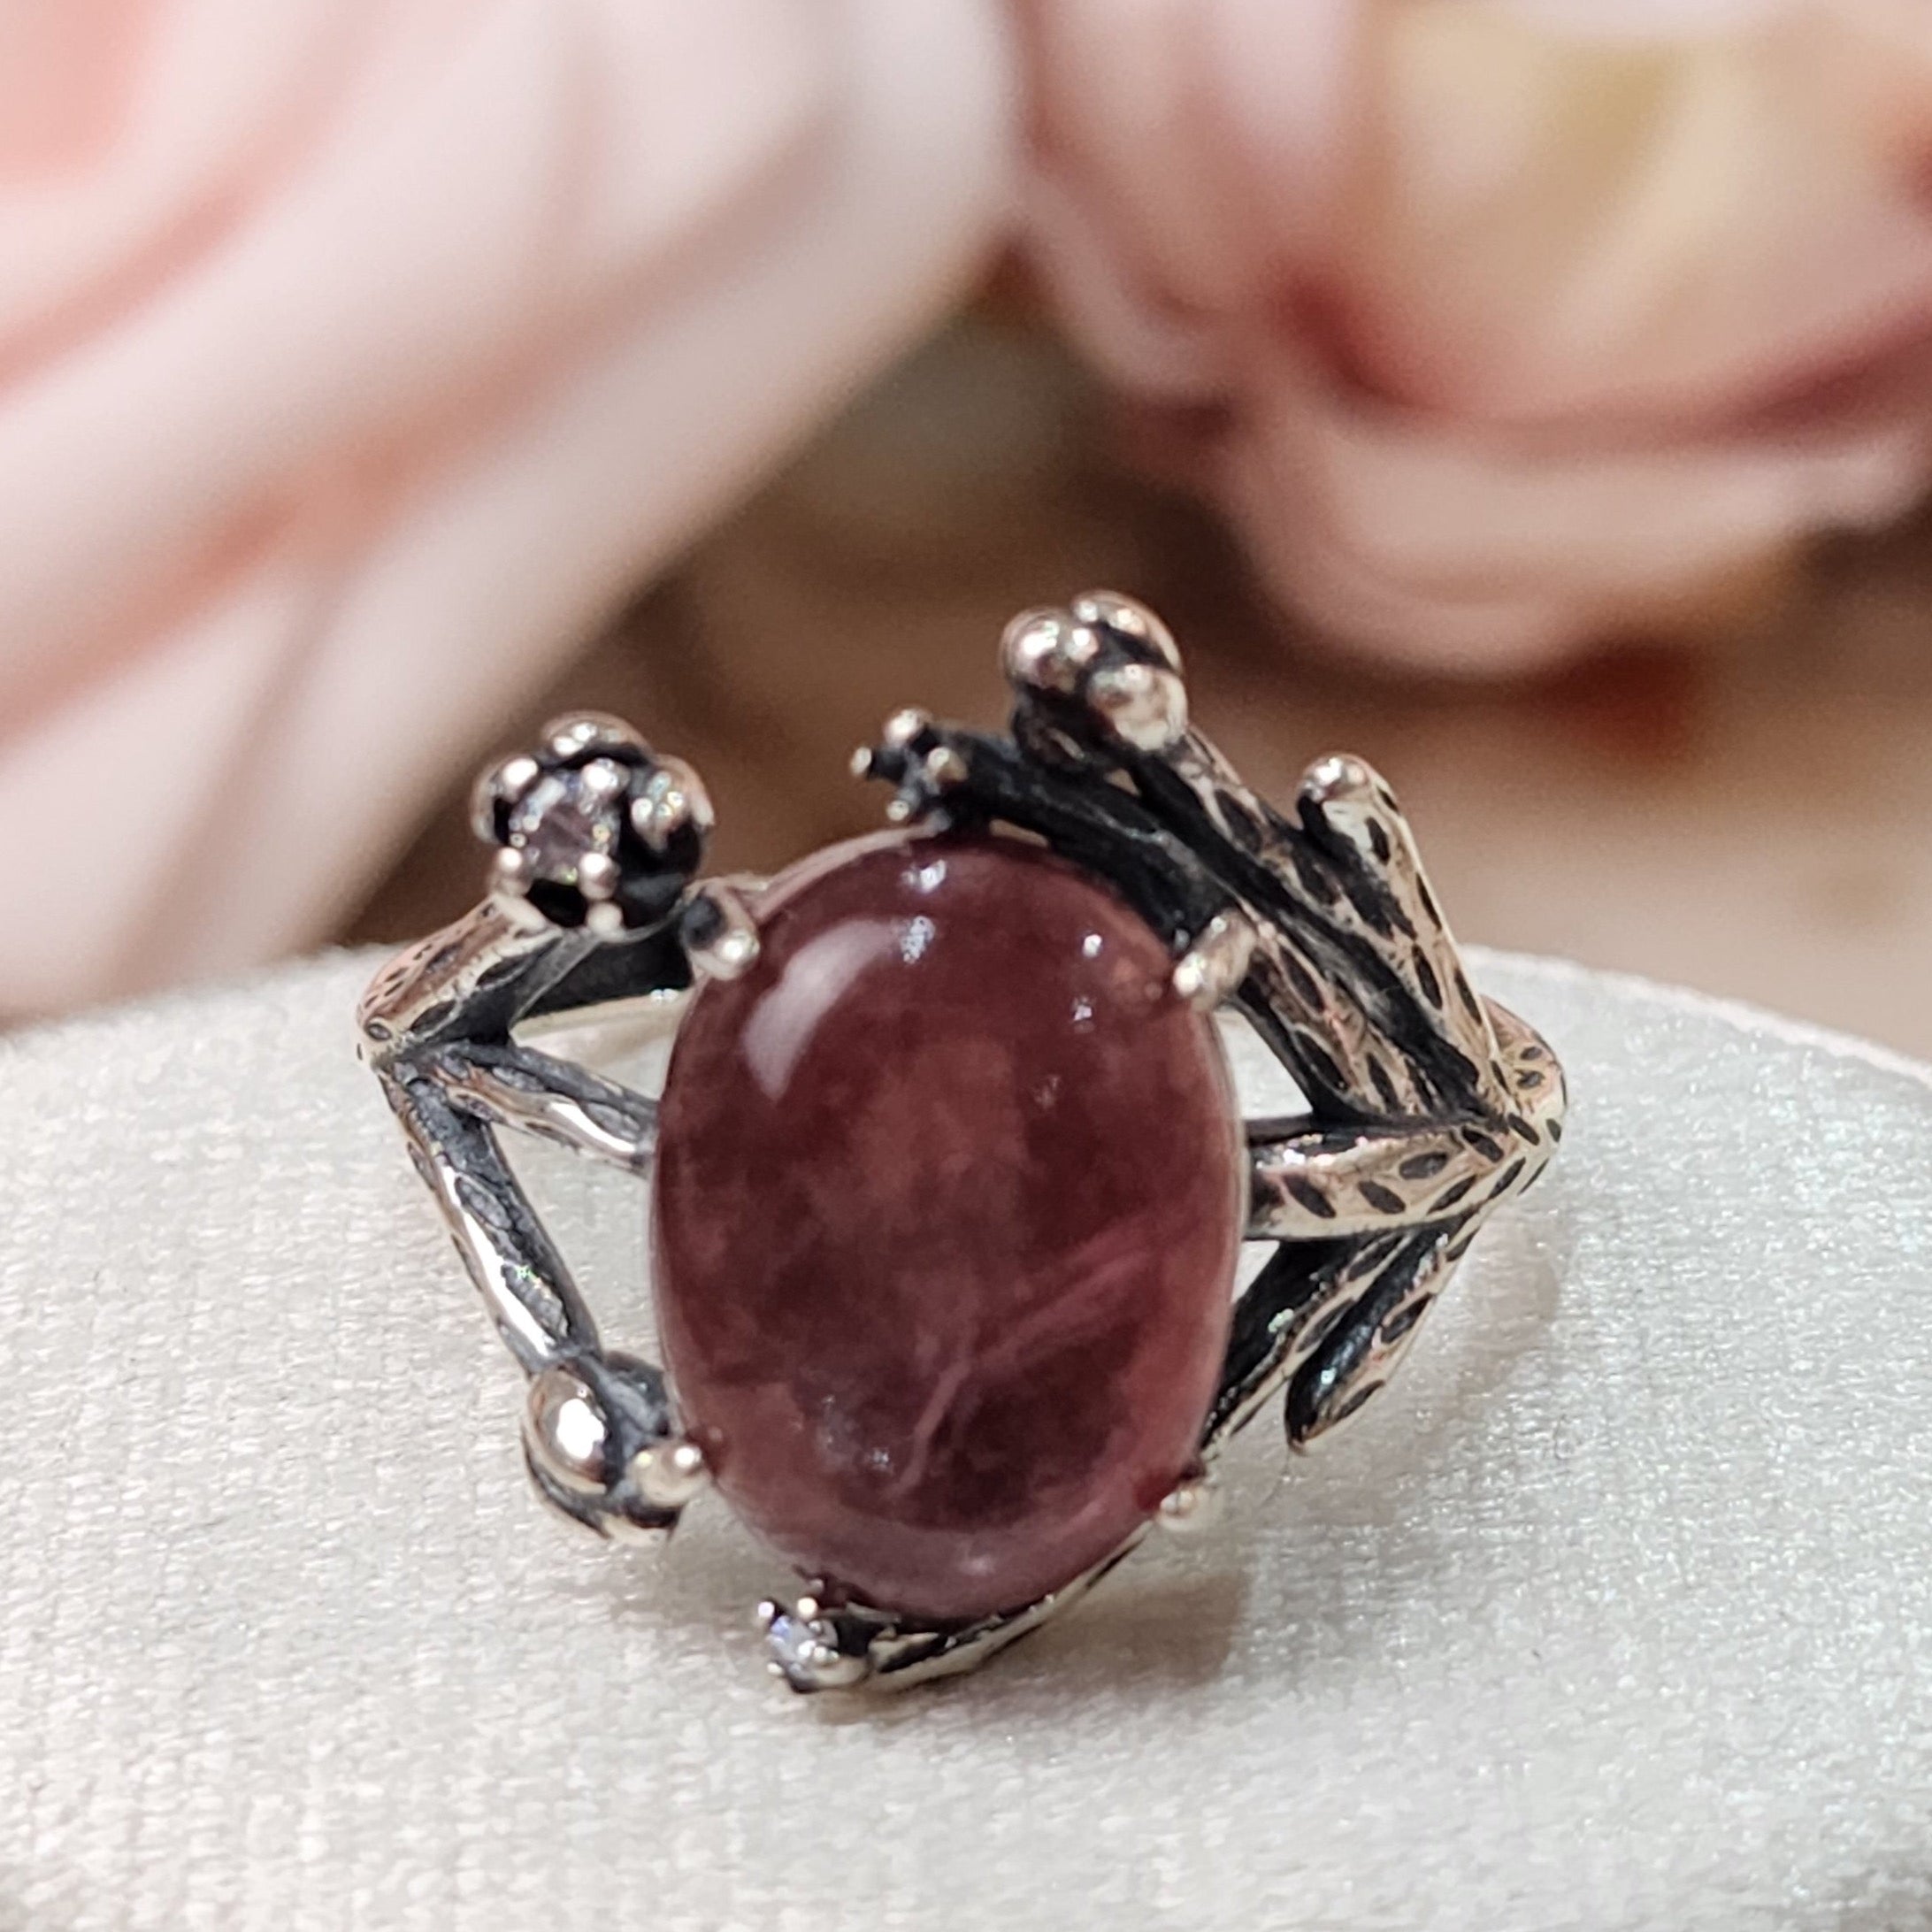 Gem Lepidolite Vintage Style Adjustable Ring .925 Silver for Anxiety Support, Joy and Stress Relief